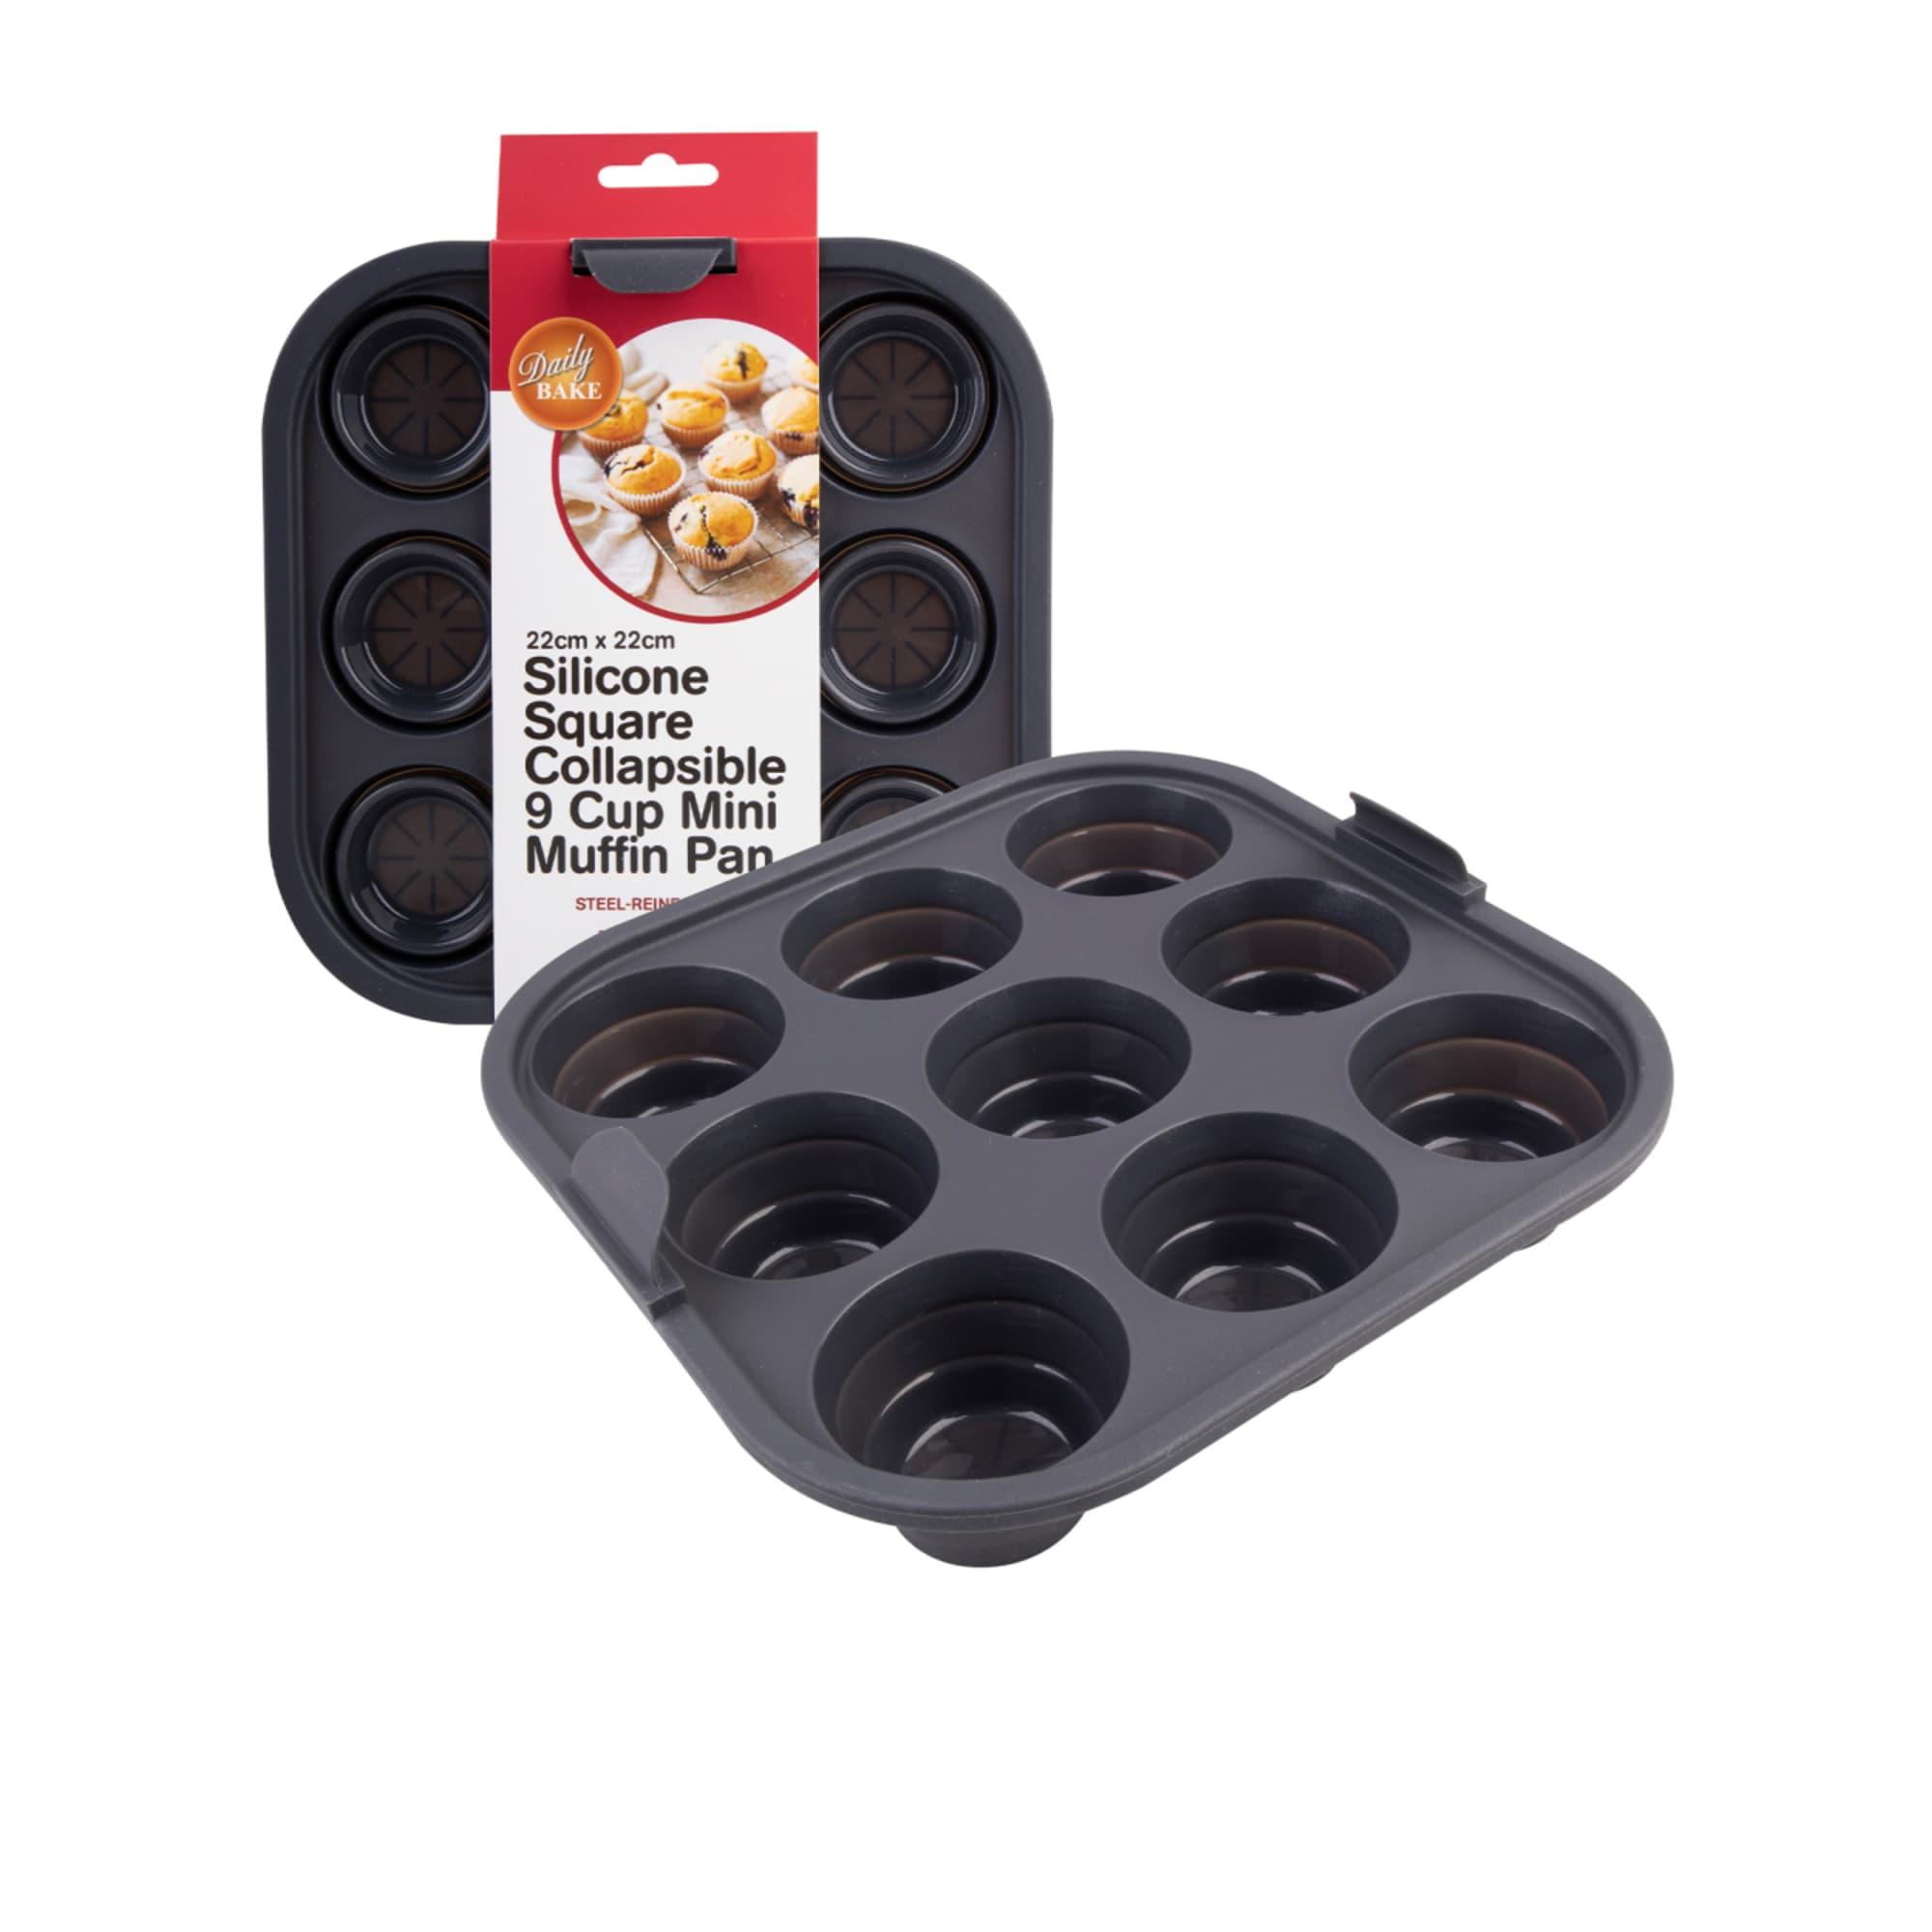 Daily Bake Silicone Square Collapsible Air Fryer Muffin Pan 9 Cup Image 6